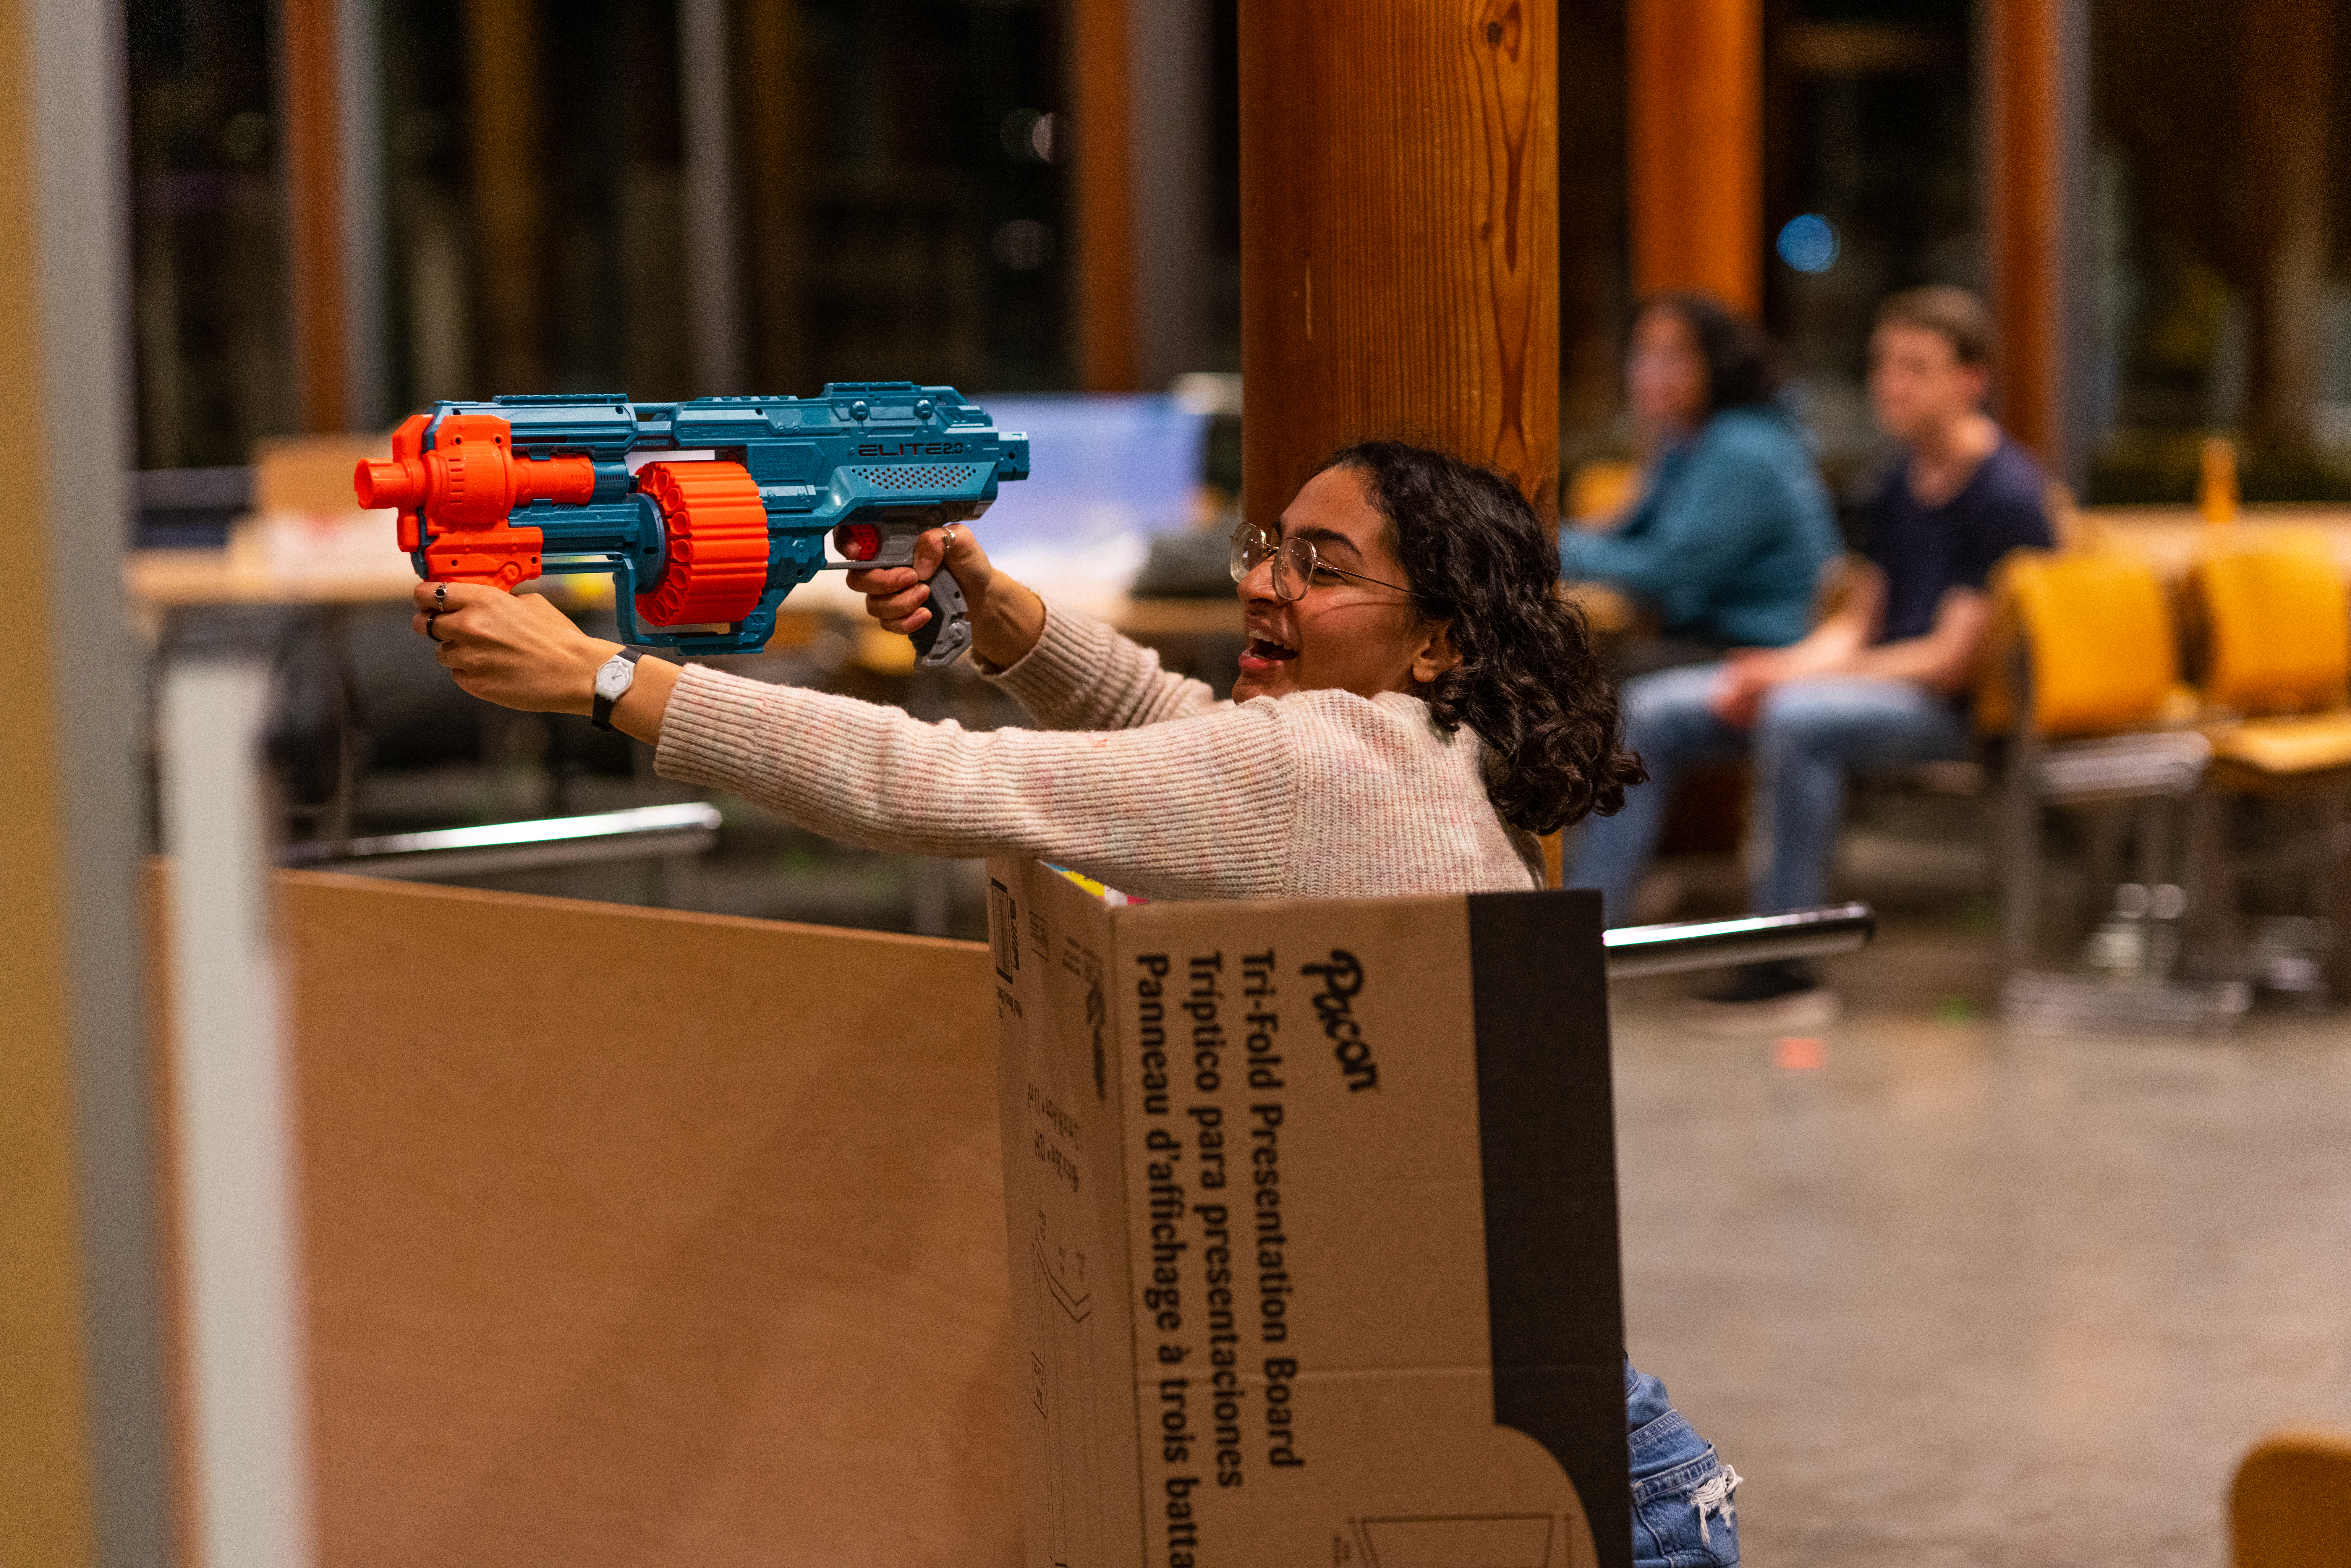 A female student holding a nerf weapon, reaching over the top of a cardboard presentation trifold and aiming across the room.